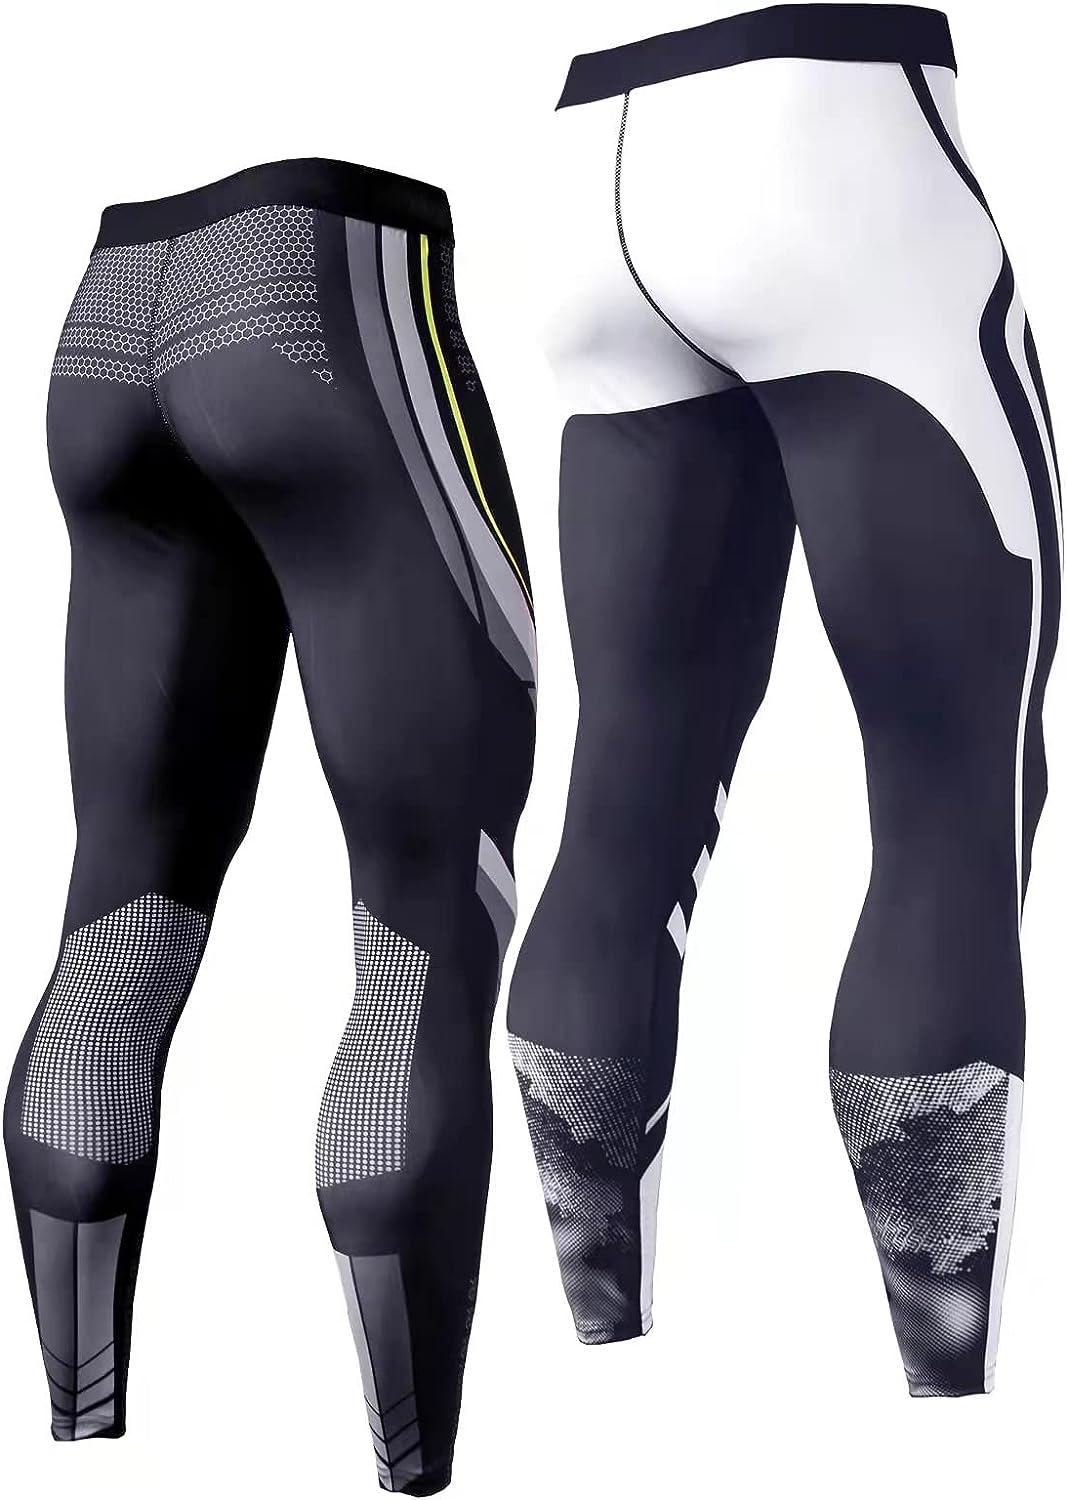 Men Running Tights Pants 2020 Men Sports Legging Sportswear Quick Dry  Breathable Pro Compression Gym Fitness Athletic Trousers